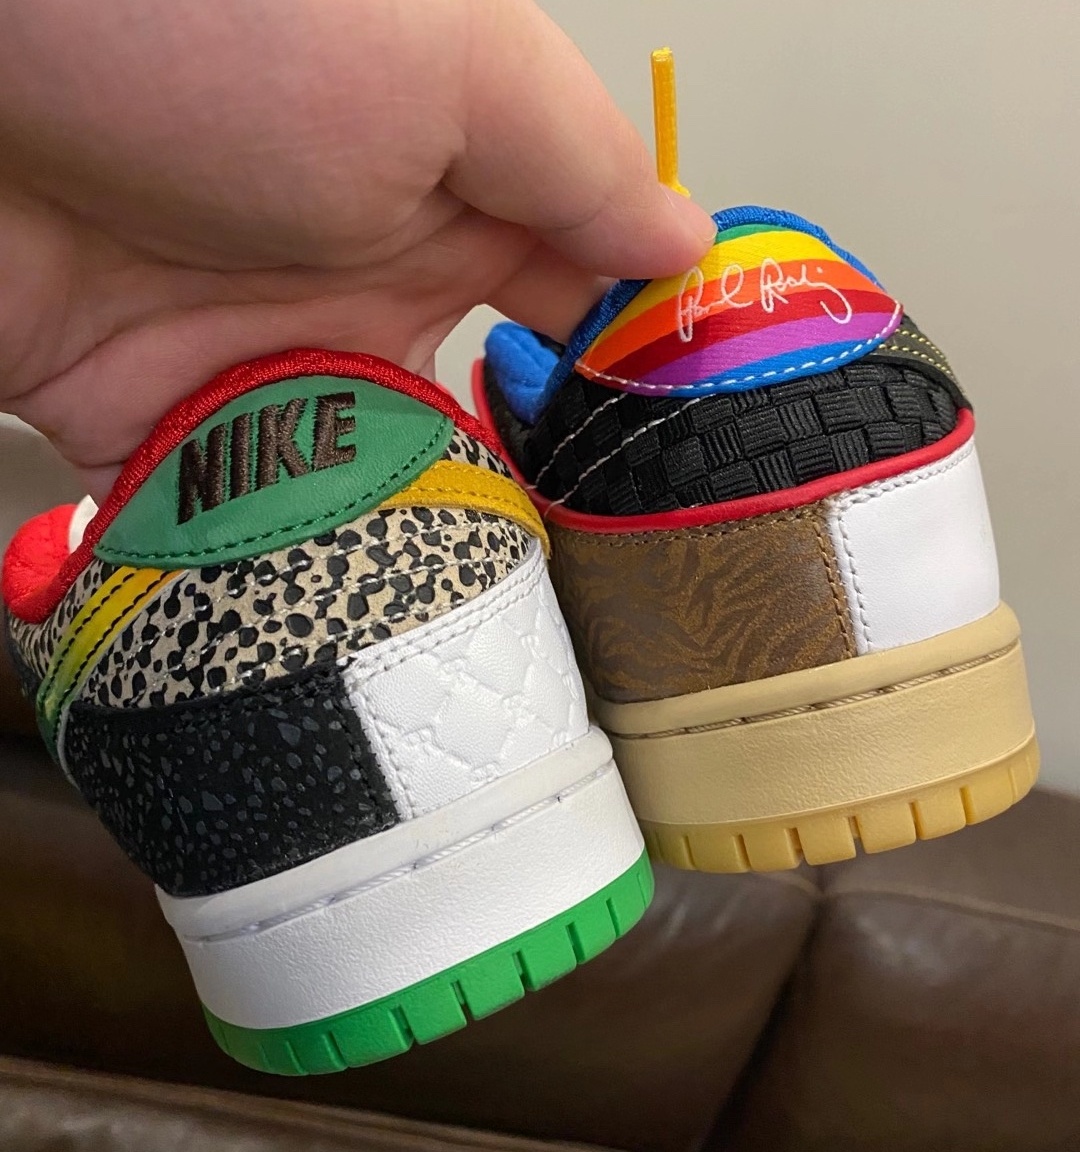 What The P-Rod Nike SB Dunk Low Release Date